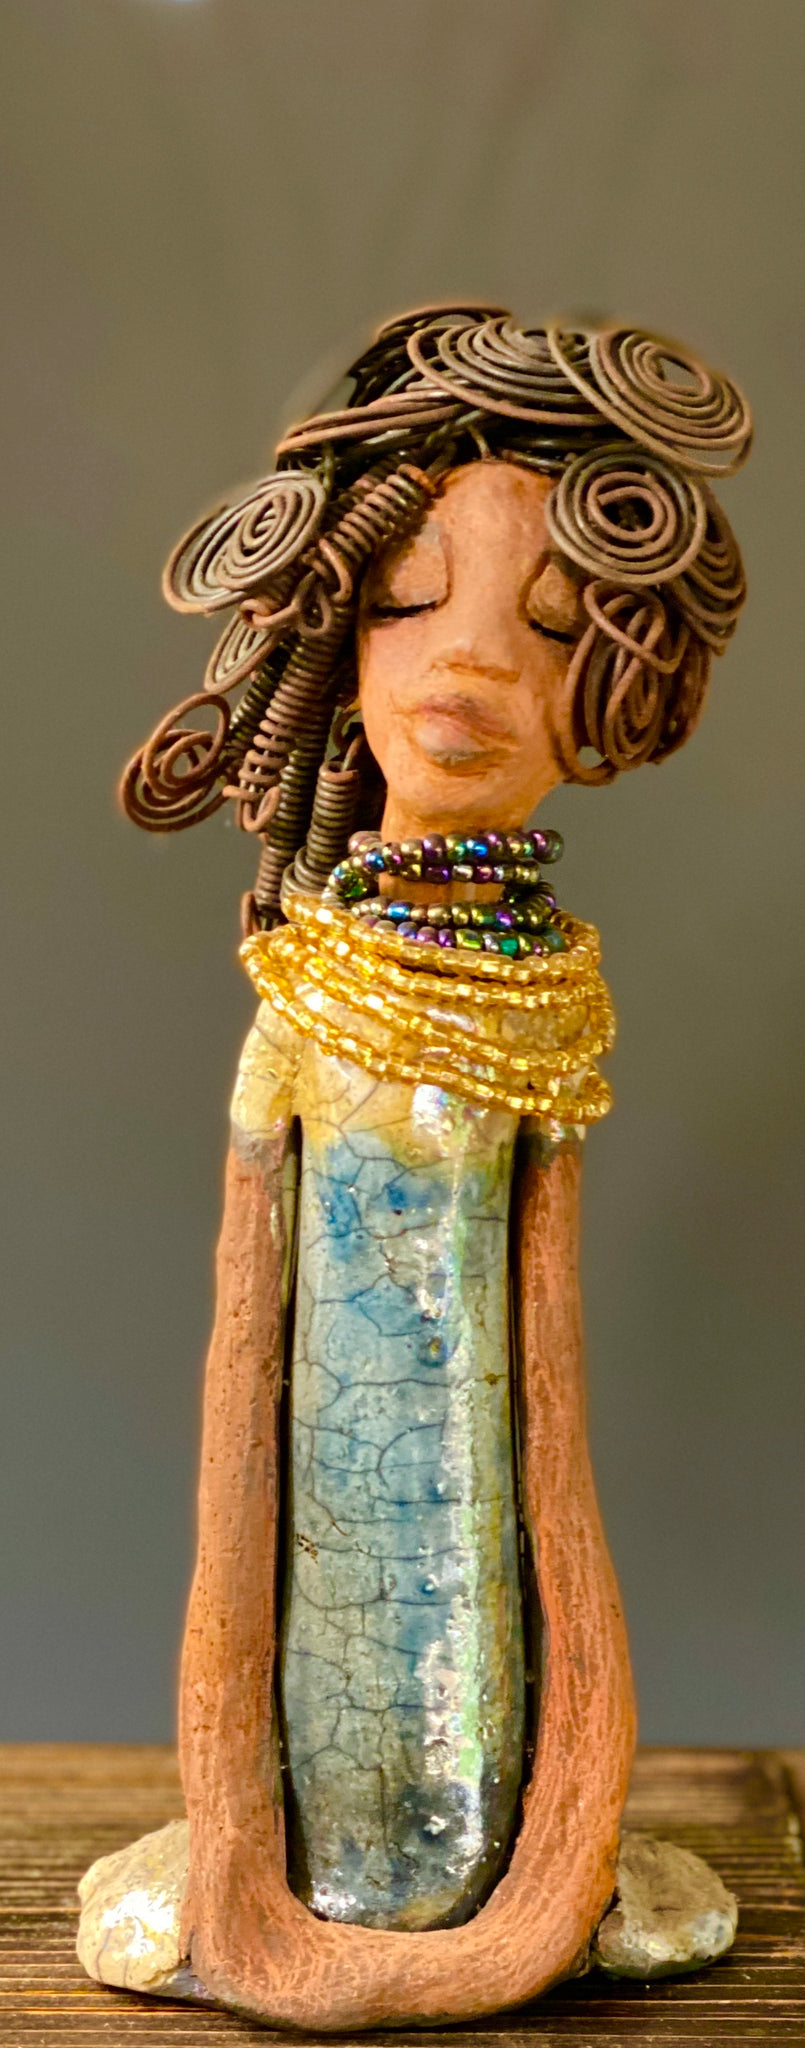 Sophia knows but will never tell! Sophia stands 10.5" x 4" x 3" and weighs 1.10 lbs. She has a  honey brown complexion with curls, coils and twisted, wire hair. Sophia wears a light blue crackle dress with a dazzling gold and multicolored beaded necklace. Yes, Sophia knows something but she will never tell. Sophia will spark a conversation of "say what" in your place.